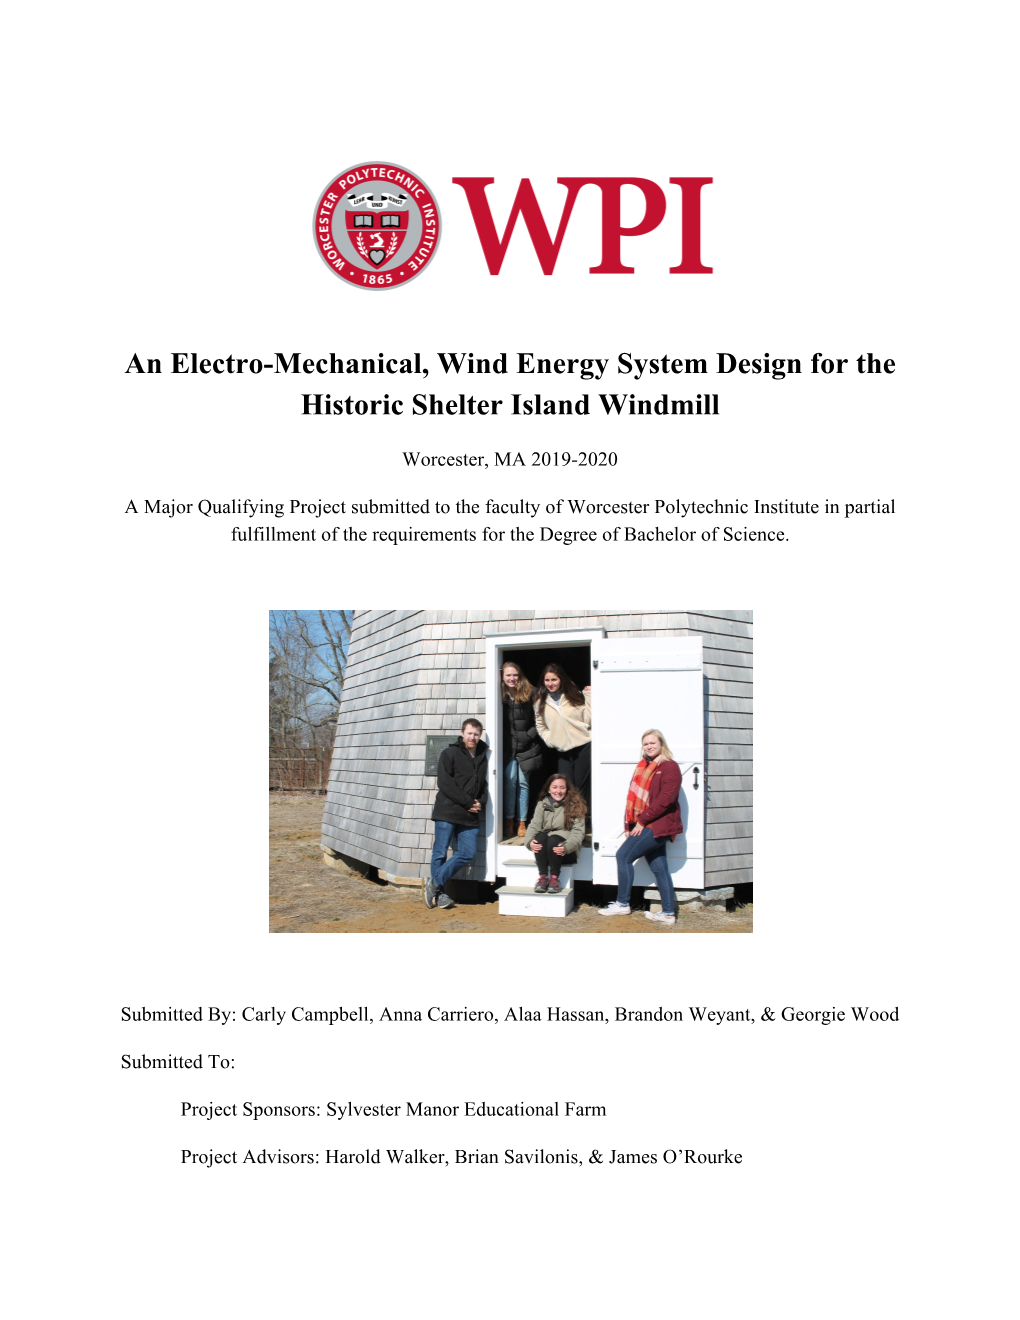 An Electro-Mechanical, Wind Energy System Design for the Historic Shelter Island Windmill